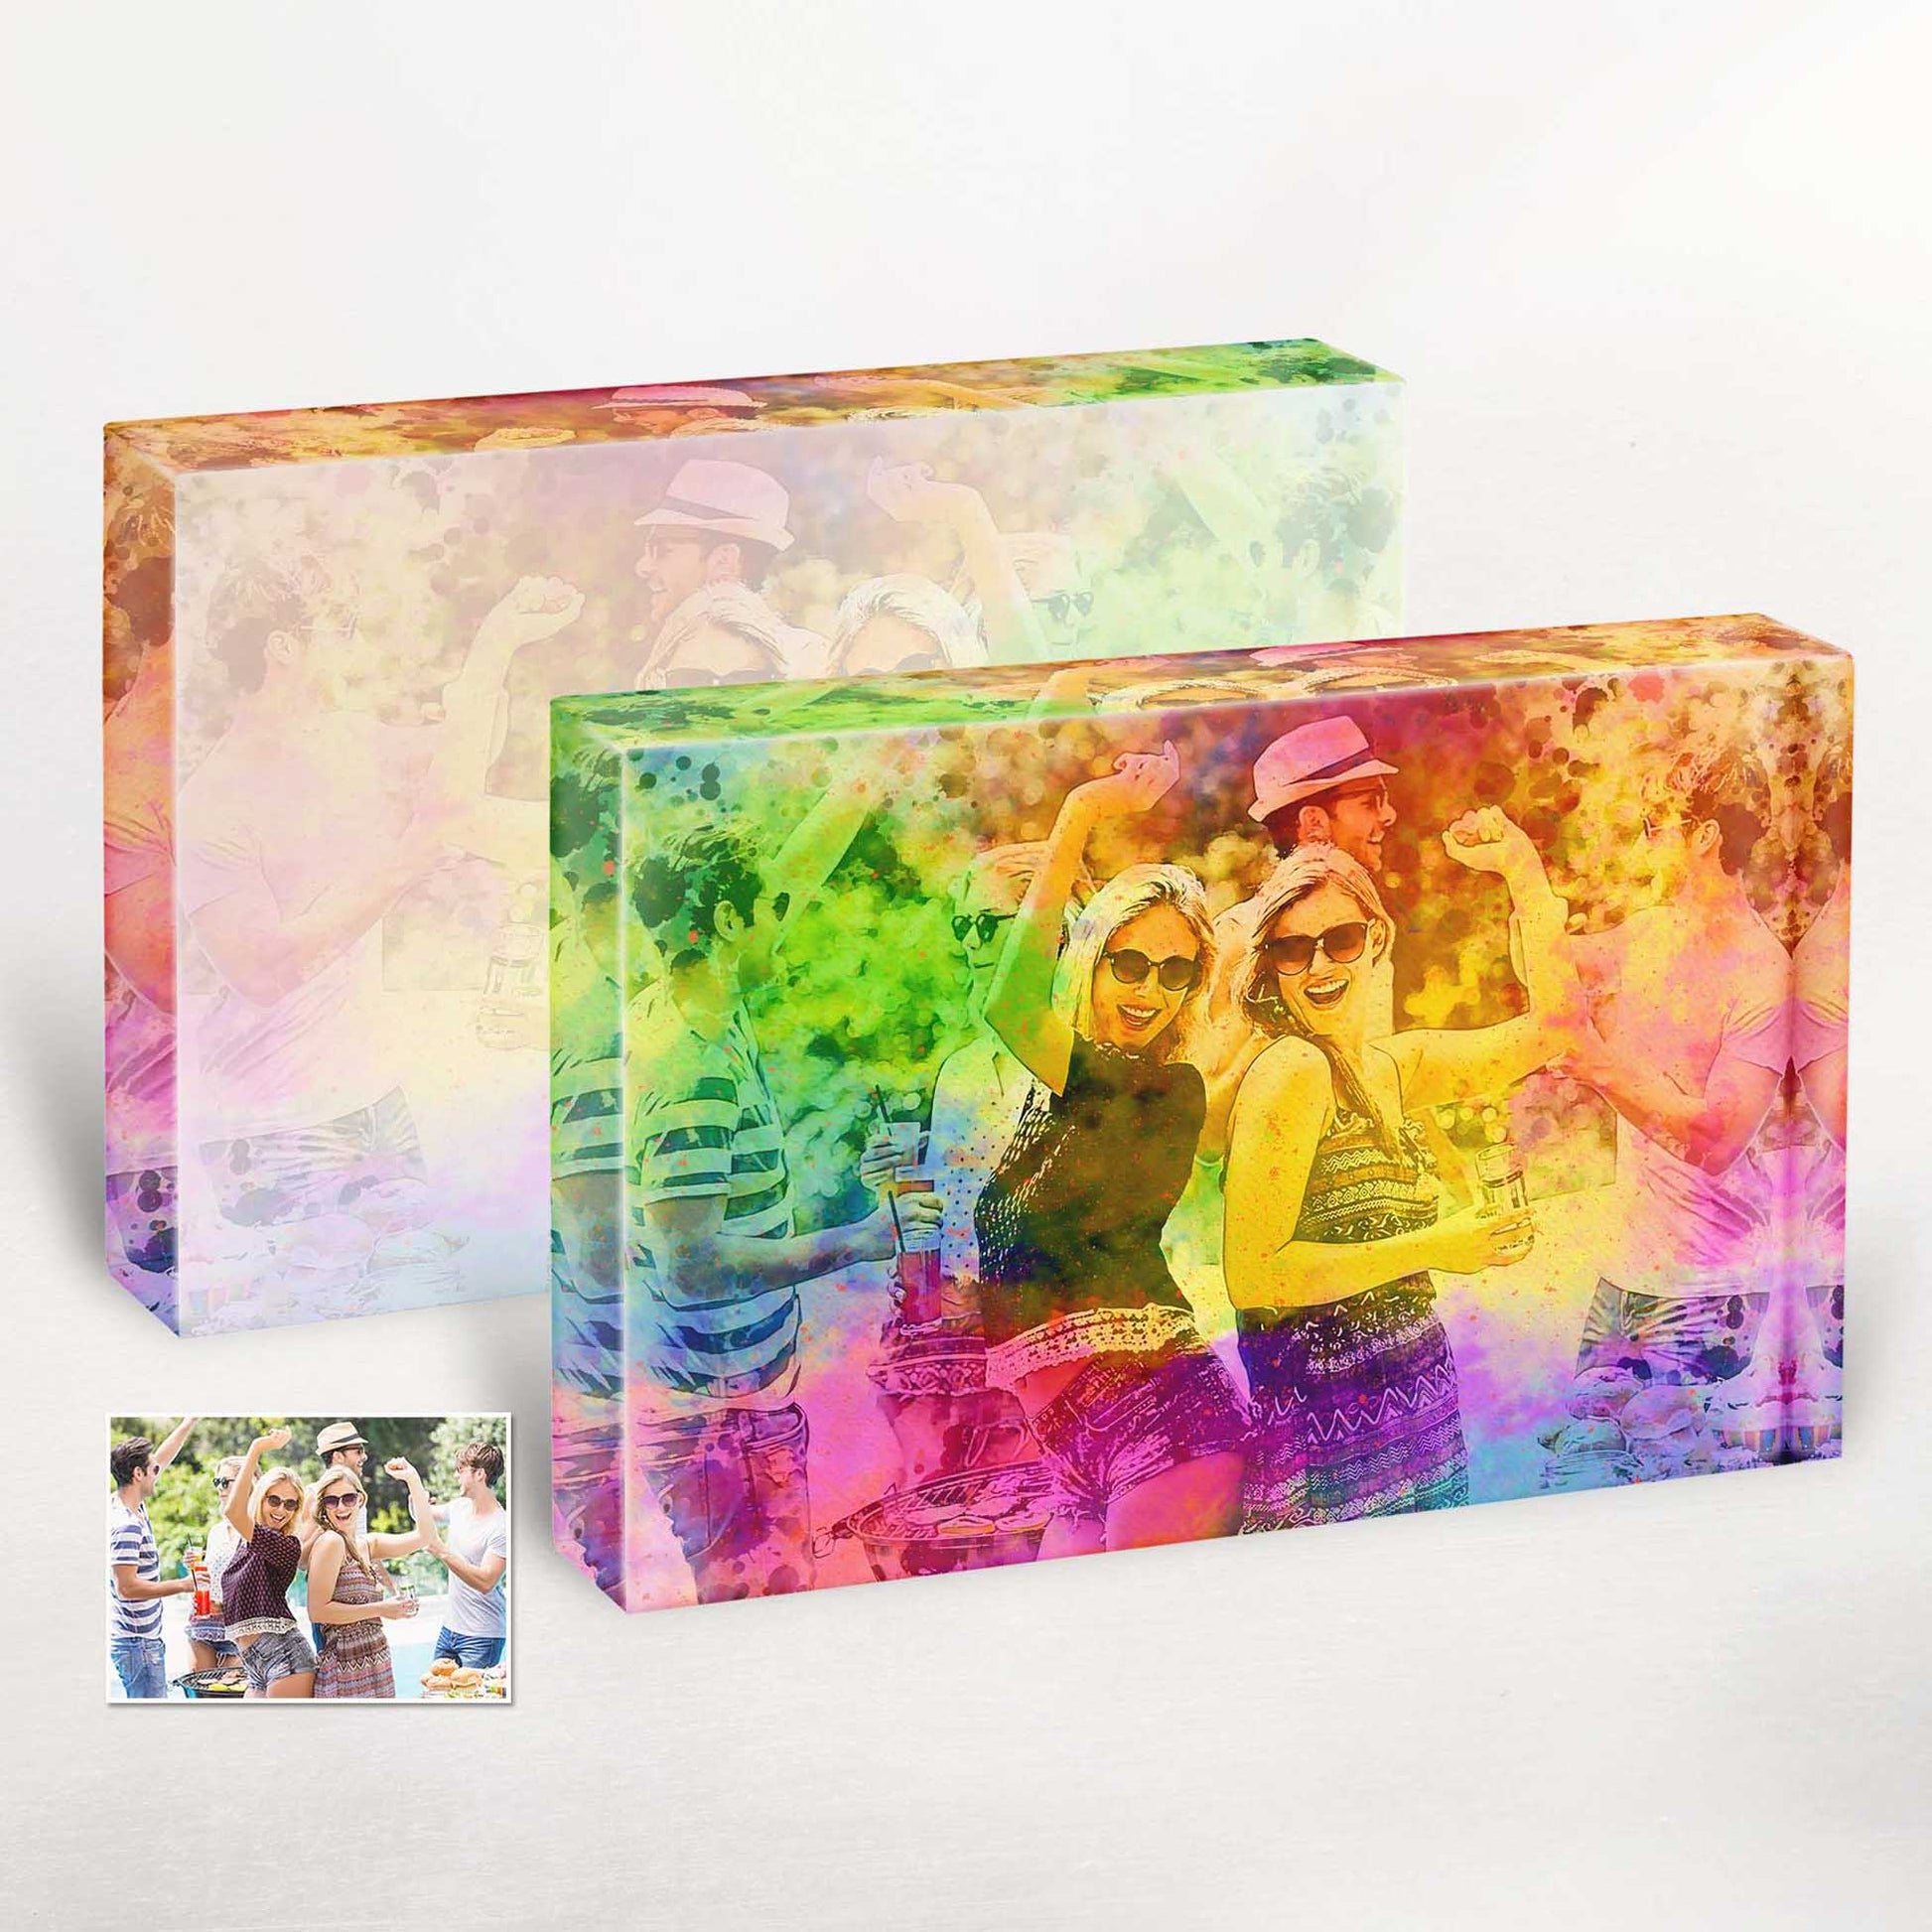 Discover a truly unique piece of artwork with our Personalised Splash of Colours Acrylic Block Photo. Each block is meticulously hand-painted, making it an original and one-of-a-kind creation that will set your decor apart from the rest.